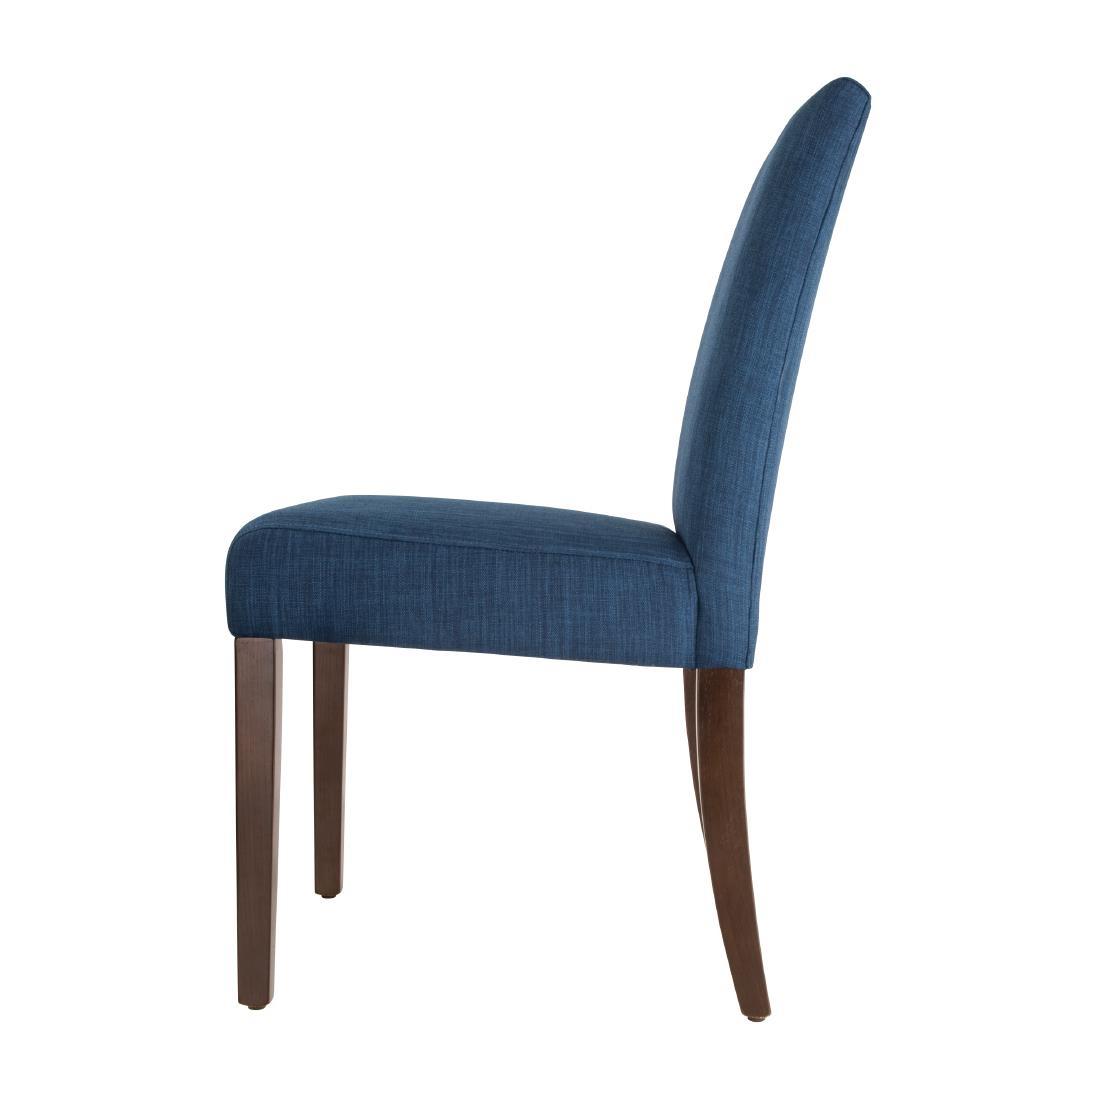 Bolero Chiswick Dining Chairs Royal Blue (Pack of 2) - DT697  - 2